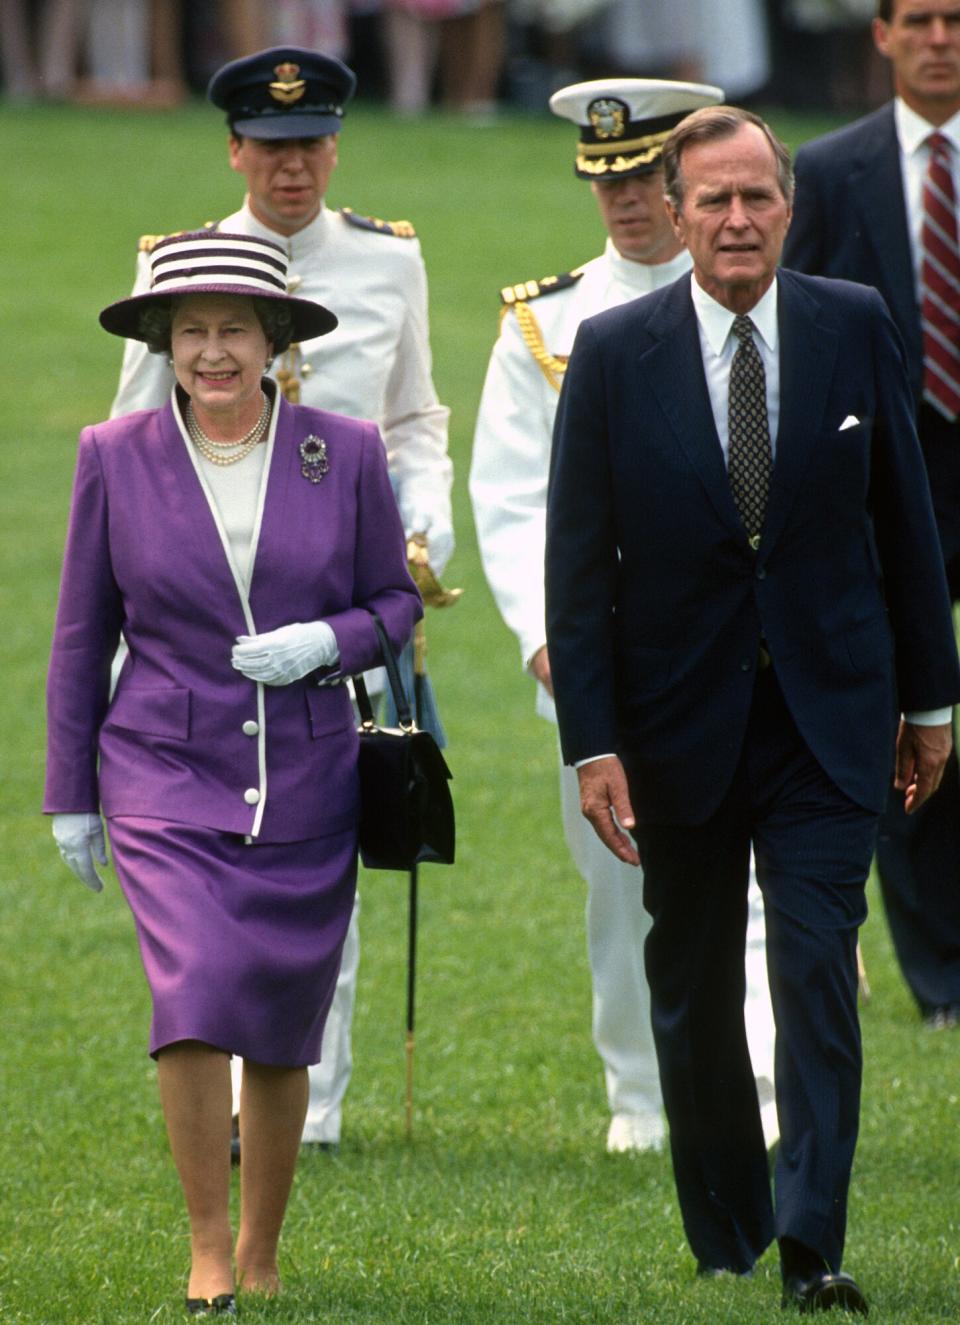 Queen Elizabeth II (left) and US President George HW Bush (1925 - 2018) walk together on the White House's South Lawn, Washington DC, May 14, 1991